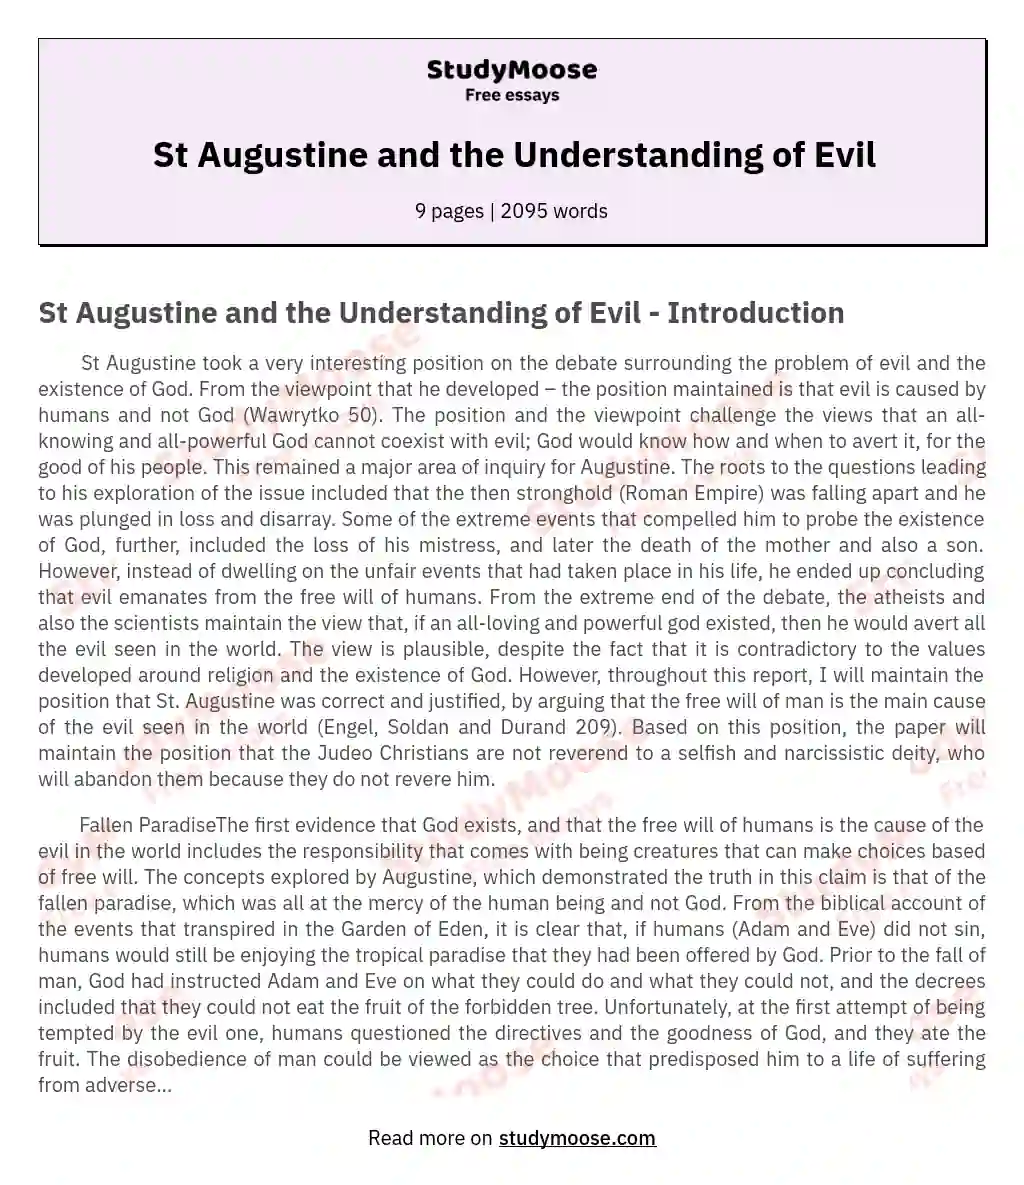 St Augustine and the Understanding of Evil essay